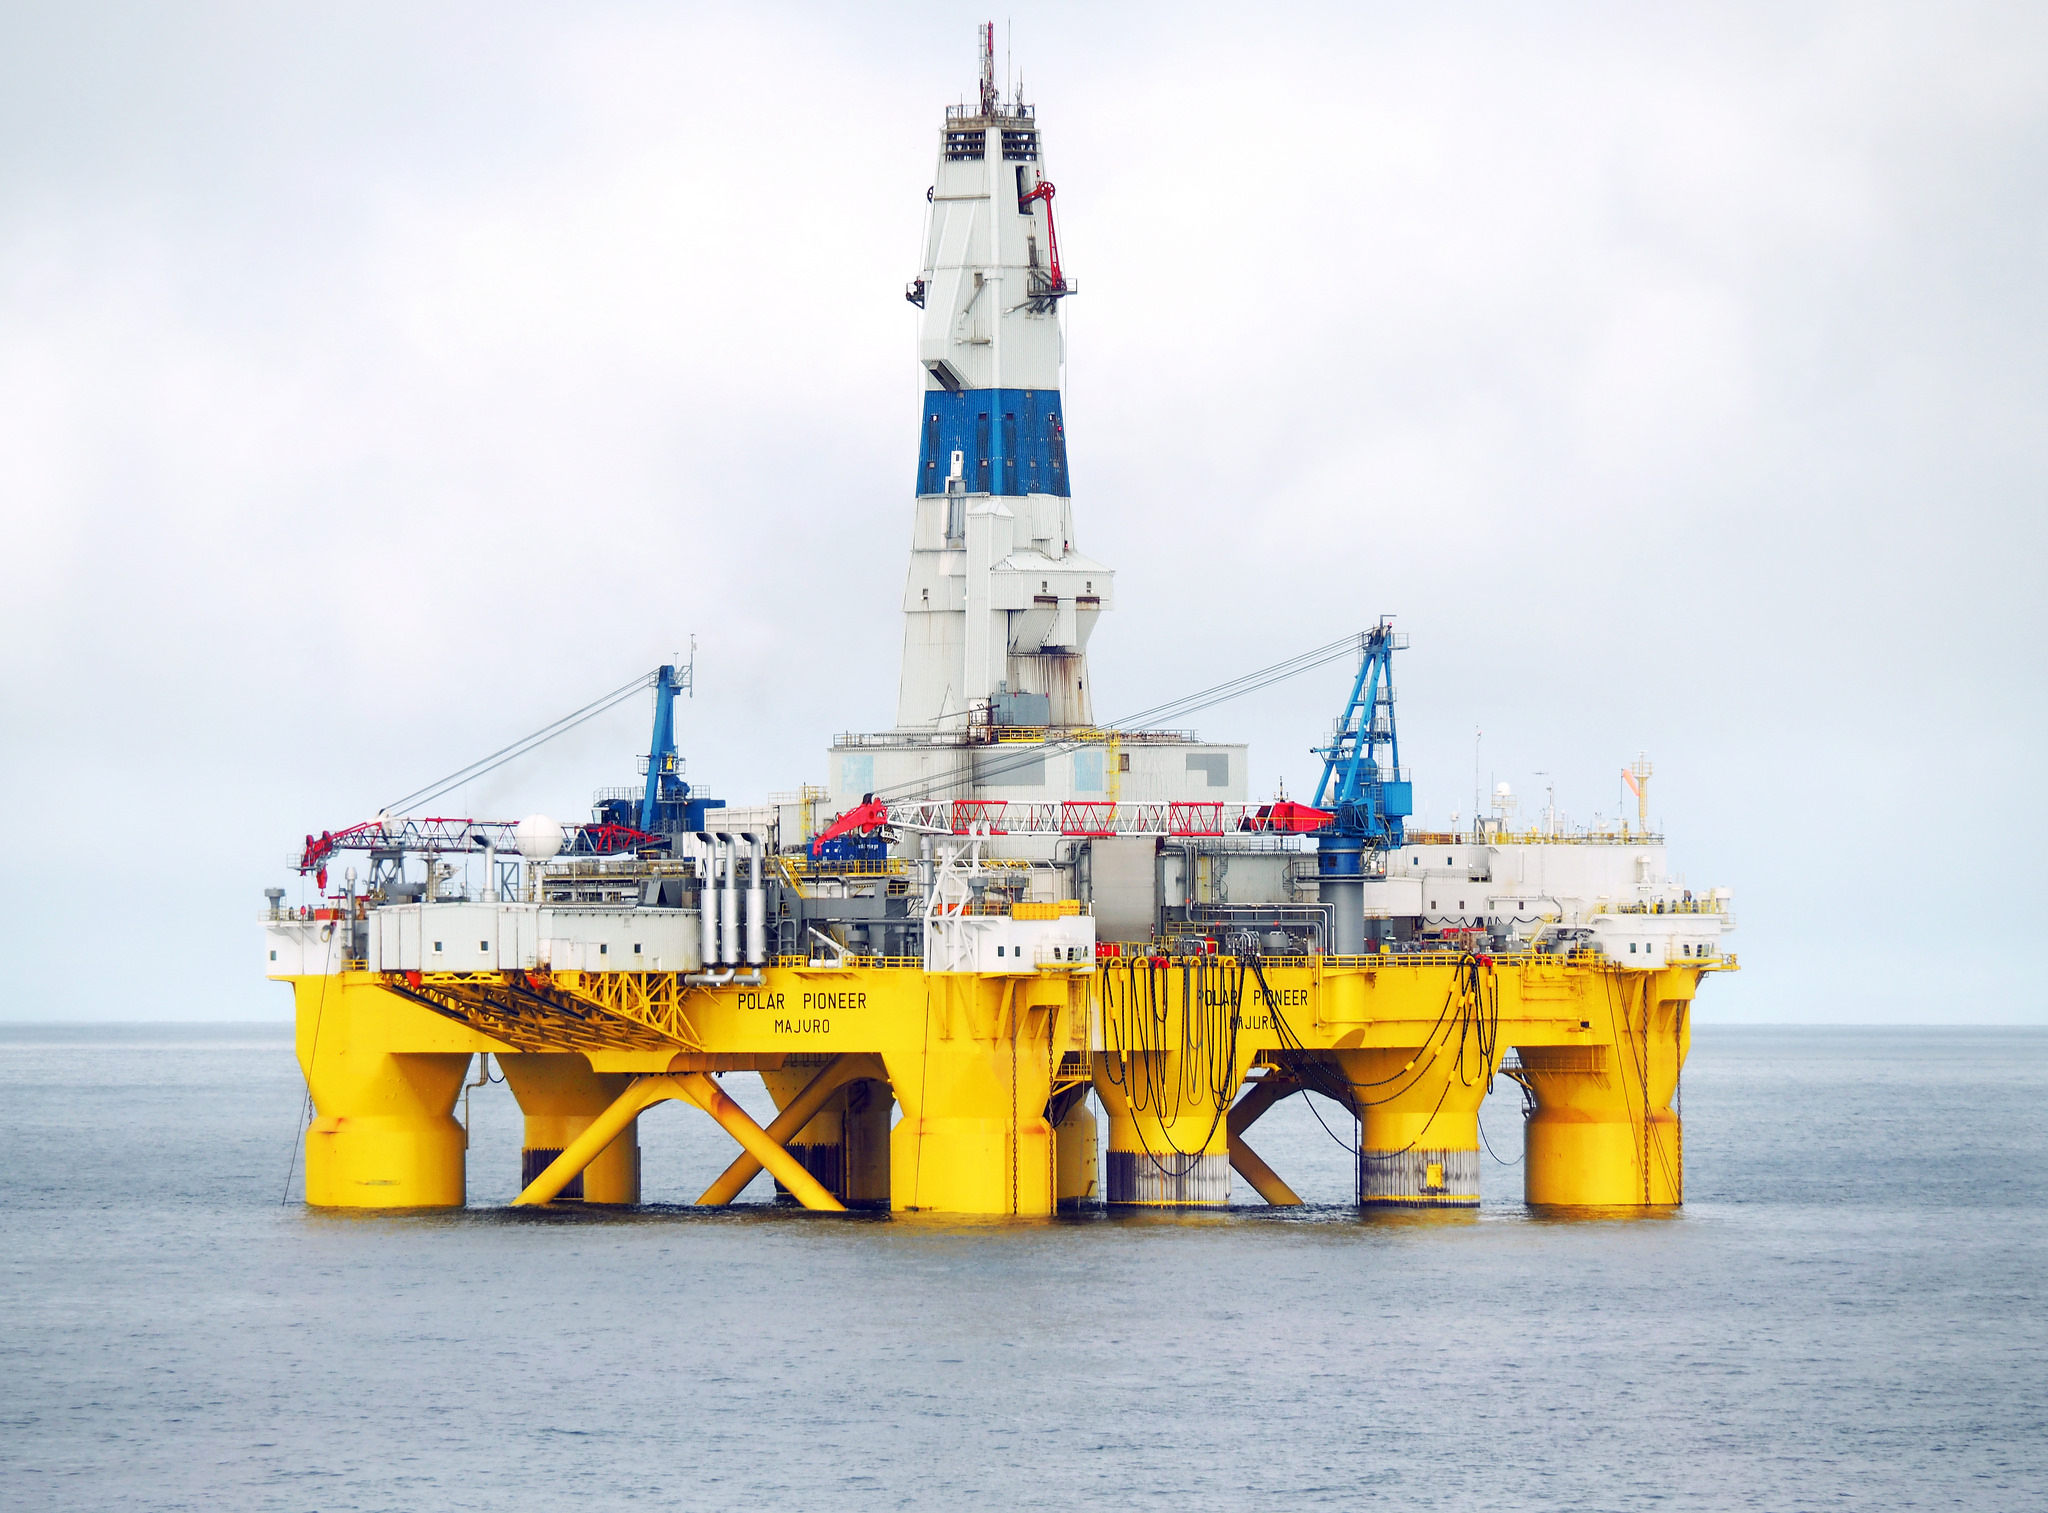 Shell Arctic offshore drilling